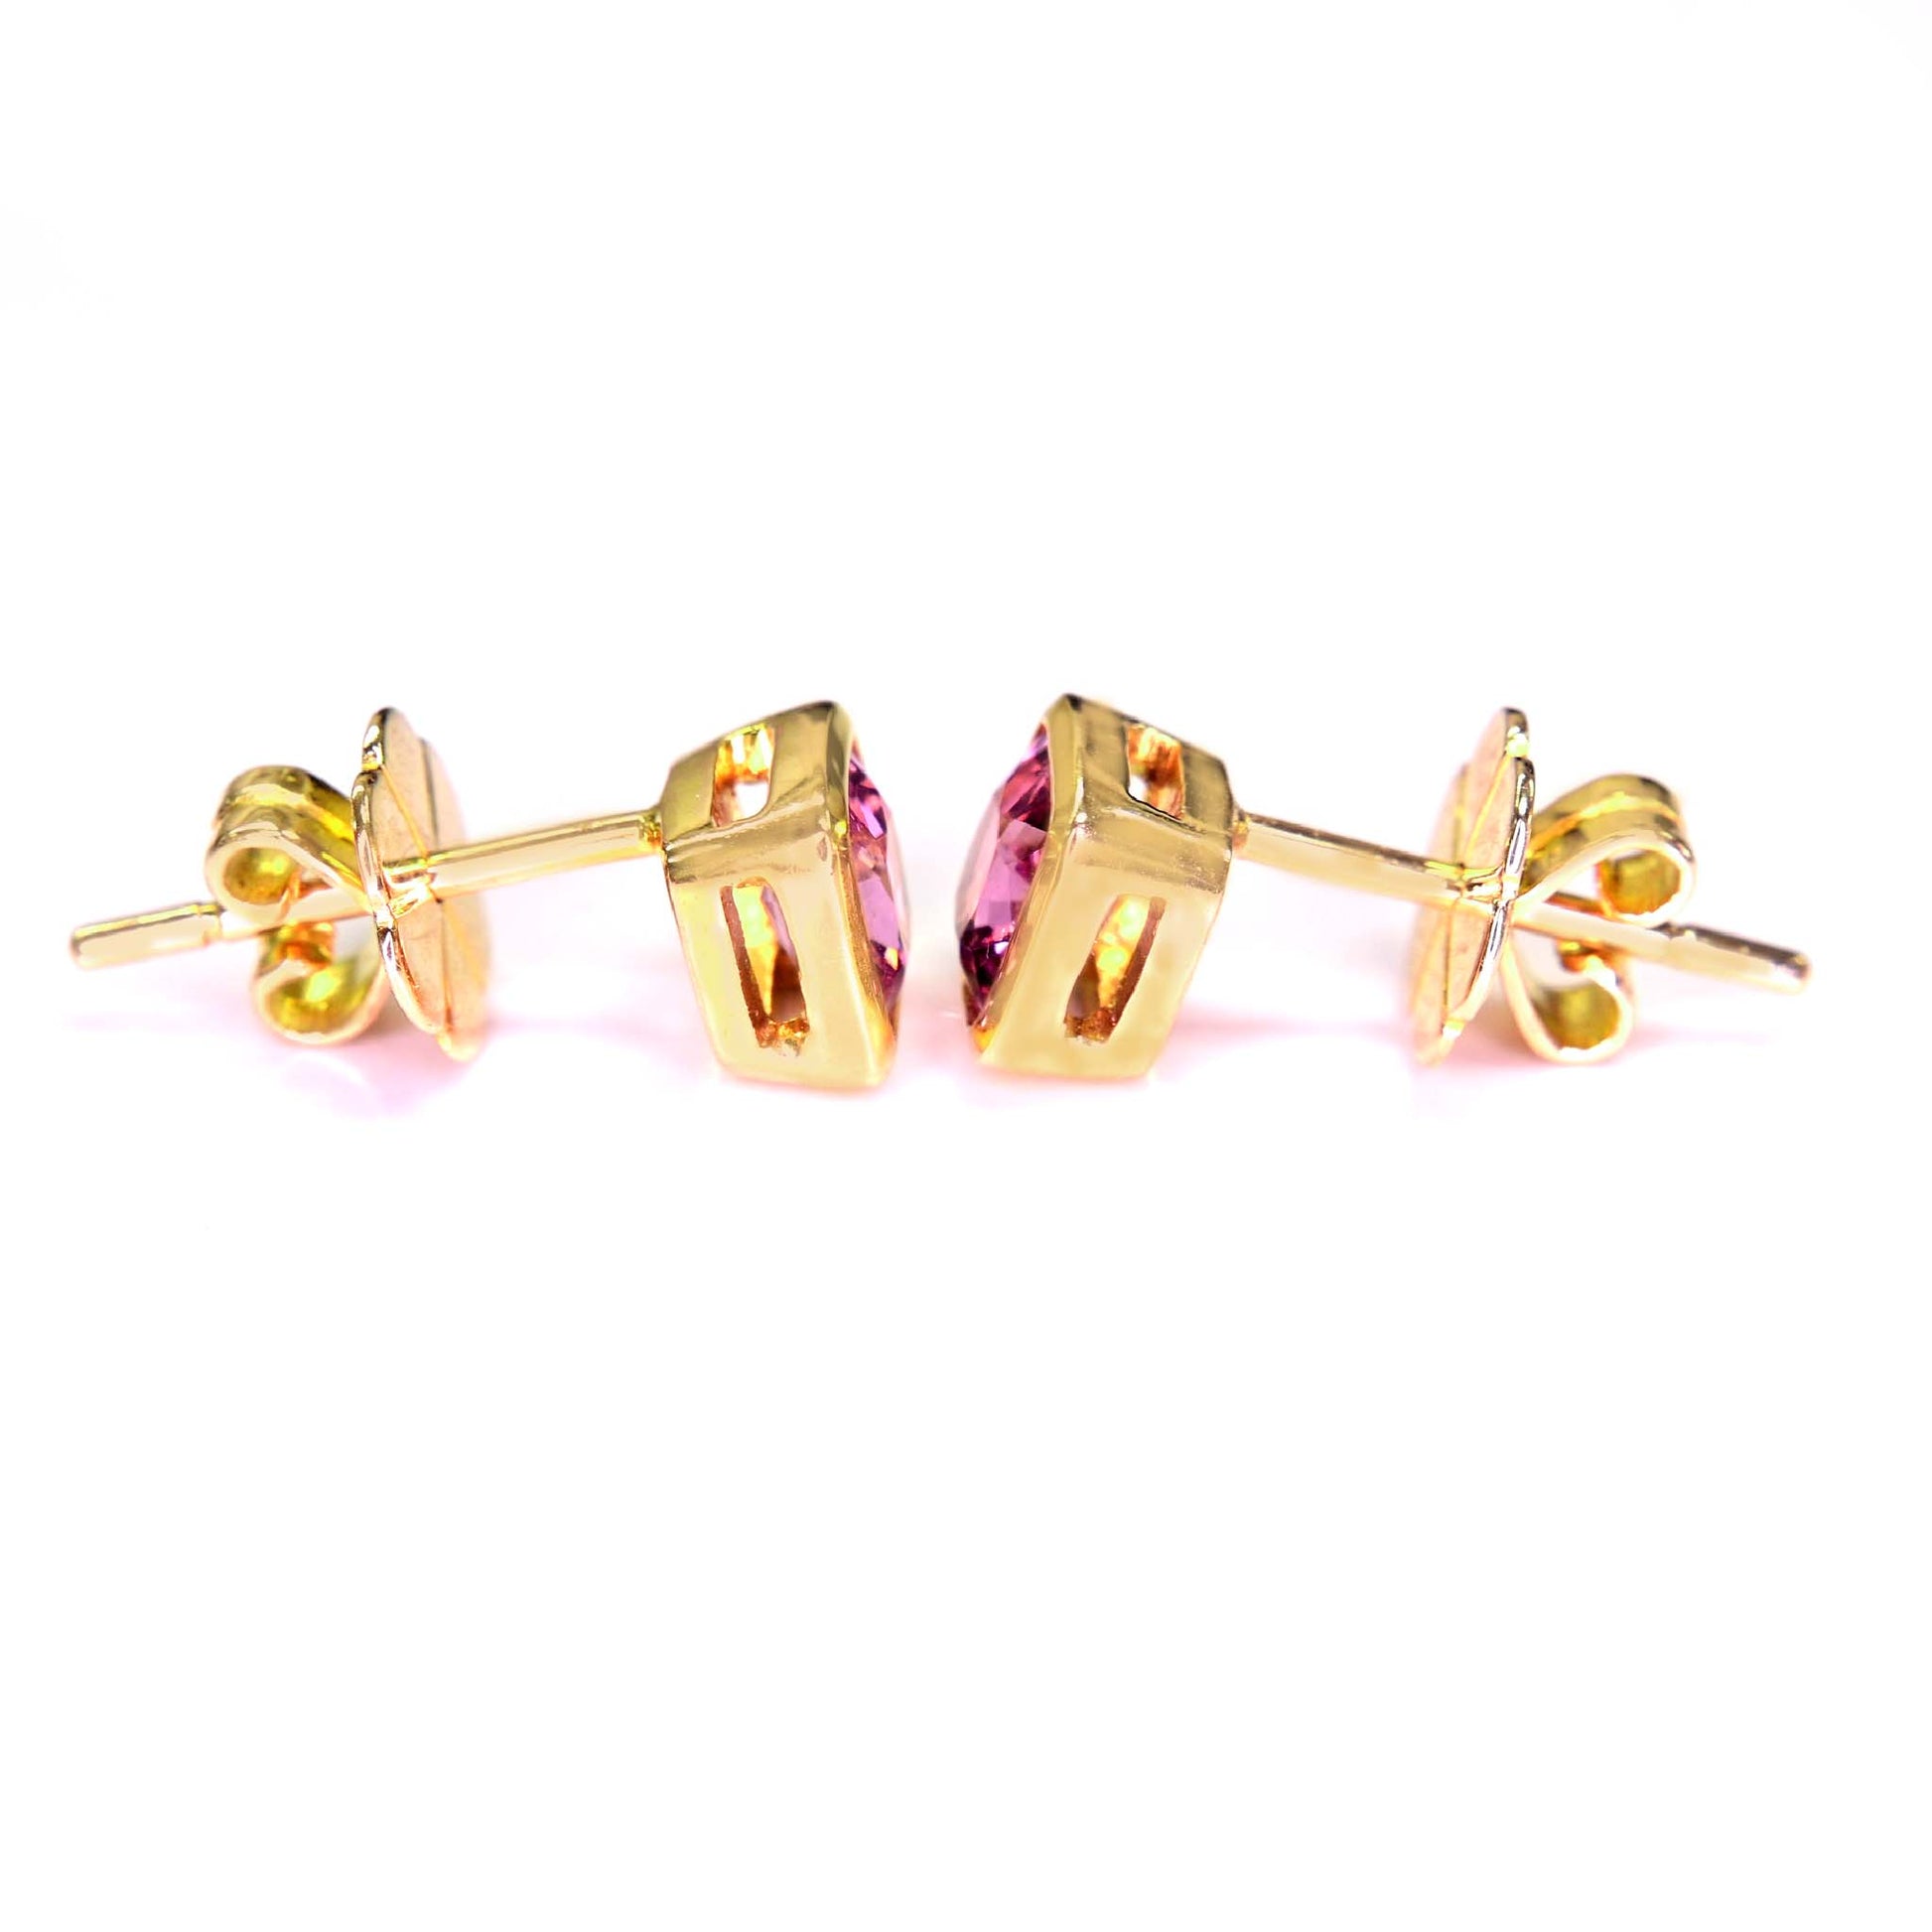 Handcrafted 14k yellow gold earrings with pink spinel stones, designed by Shiraz Jewelry